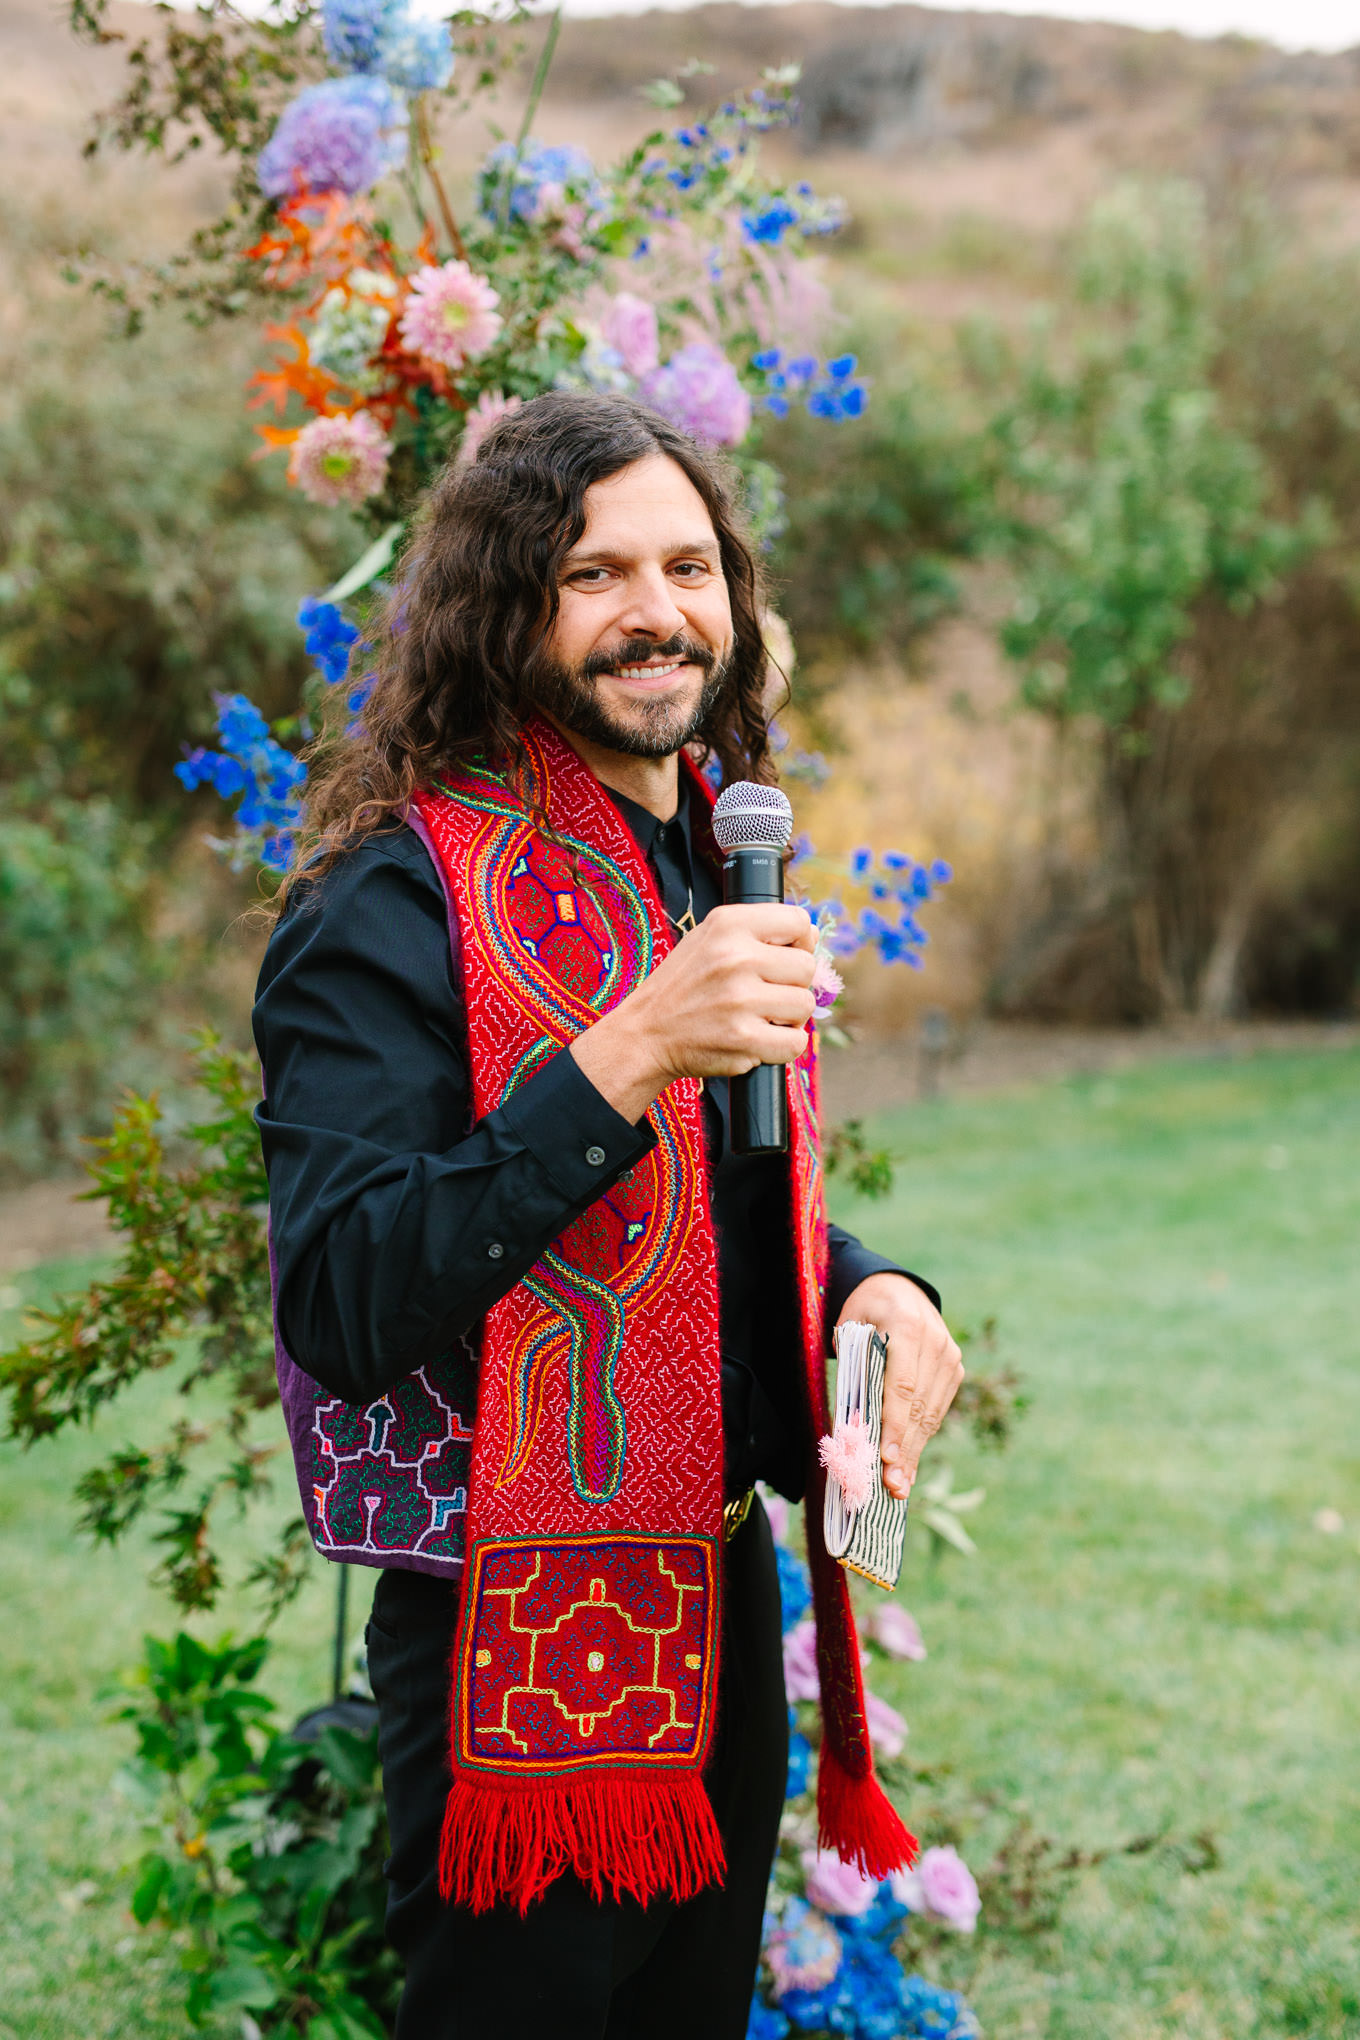 Wedding officiant at ceremony | Colorful and quirky wedding at Higuera Ranch in San Luis Obispo | #sanluisobispowedding #californiawedding #higueraranch #madonnainn   
Source: Mary Costa Photography | Los Angeles